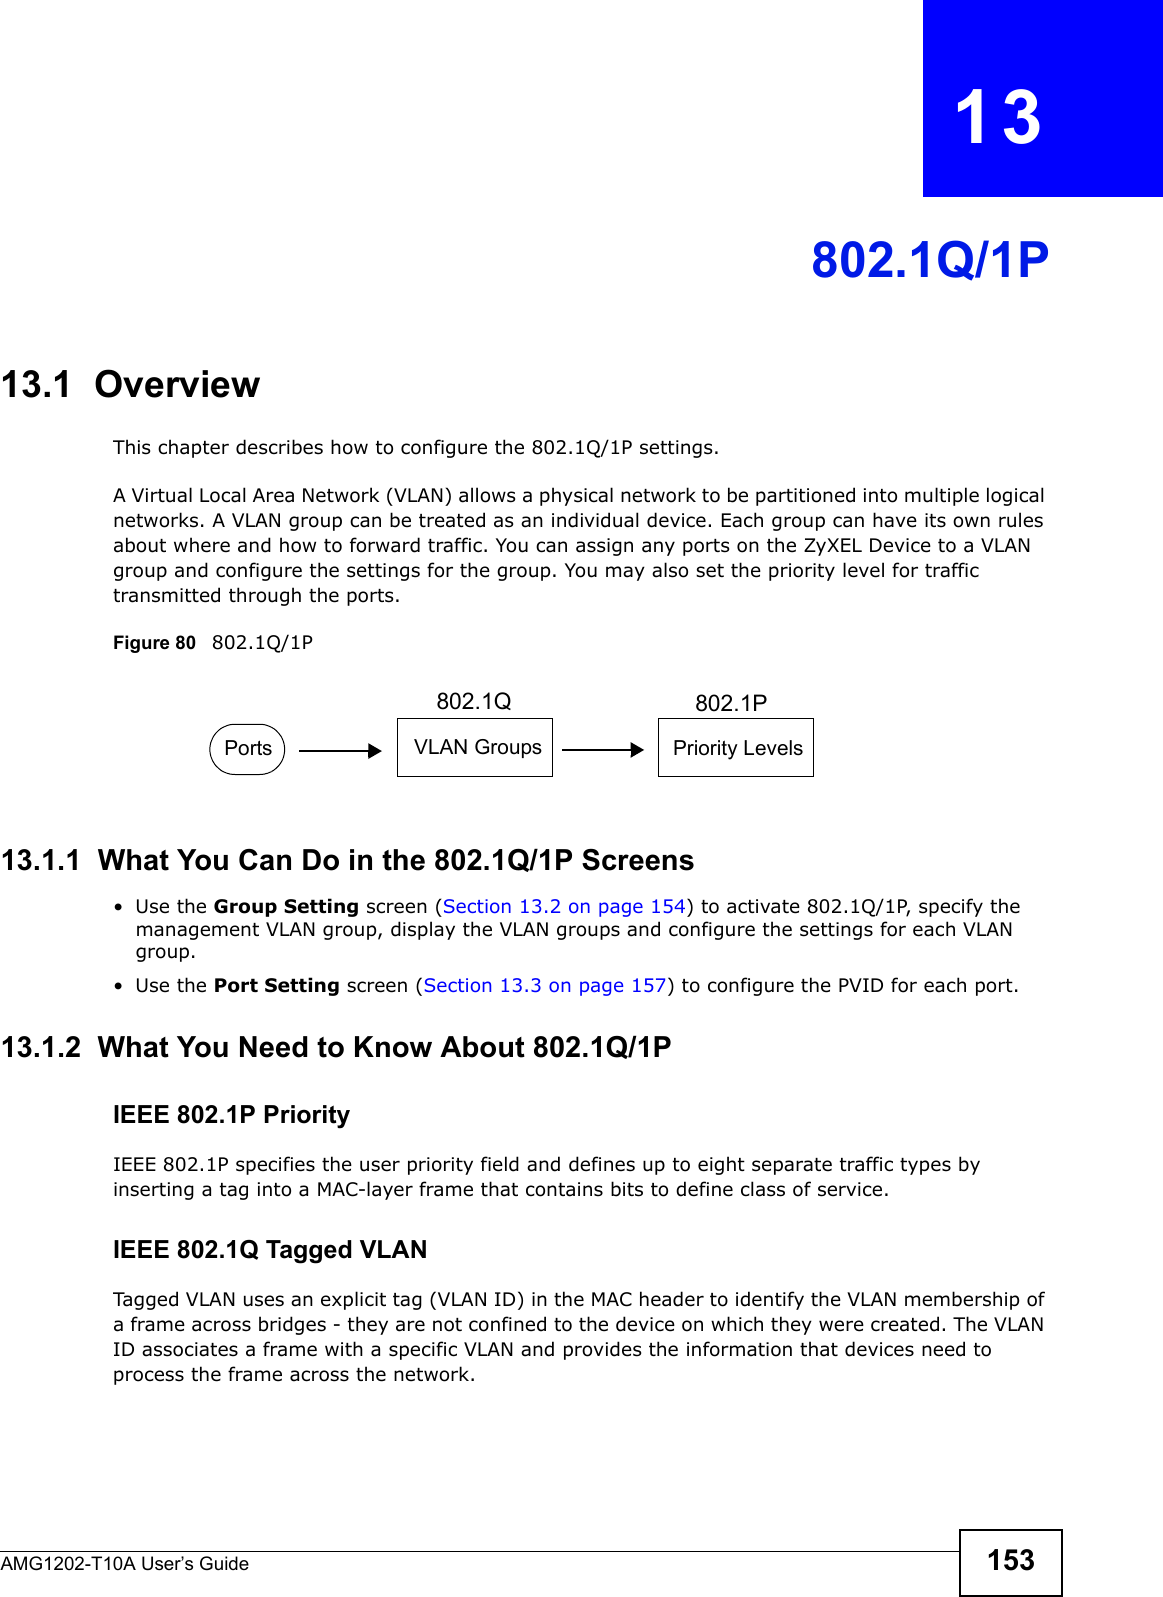 AMG1202-T10A User’s Guide 153CHAPTER   13802.1Q/1P13.1  OverviewThis chapter describes how to configure the 802.1Q/1P settings.A Virtual Local Area Network (VLAN) allows a physical network to be partitioned into multiple logical networks. A VLAN group can be treated as an individual device. Each group can have its own rules about where and how to forward traffic. You can assign any ports on the ZyXEL Device to a VLAN group and configure the settings for the group. You may also set the priority level for traffic transmitted through the ports.Figure 80   802.1Q/1P13.1.1  What You Can Do in the 802.1Q/1P Screens•Use the Group Setting screen (Section 13.2 on page 154) to activate 802.1Q/1P, specify the management VLAN group, display the VLAN groups and configure the settings for each VLAN group.•Use the Port Setting screen (Section 13.3 on page 157) to configure the PVID for each port.13.1.2  What You Need to Know About 802.1Q/1PIEEE 802.1P PriorityIEEE 802.1P specifies the user priority field and defines up to eight separate traffic types by inserting a tag into a MAC-layer frame that contains bits to define class of service.IEEE 802.1Q Tagged VLANTagged VLAN uses an explicit tag (VLAN ID) in the MAC header to identify the VLAN membership of a frame across bridges - they are not confined to the device on which they were created. The VLAN ID associates a frame with a specific VLAN and provides the information that devices need to process the frame across the network.Ports VLAN Groups Priority Levels802.1Q 802.1P